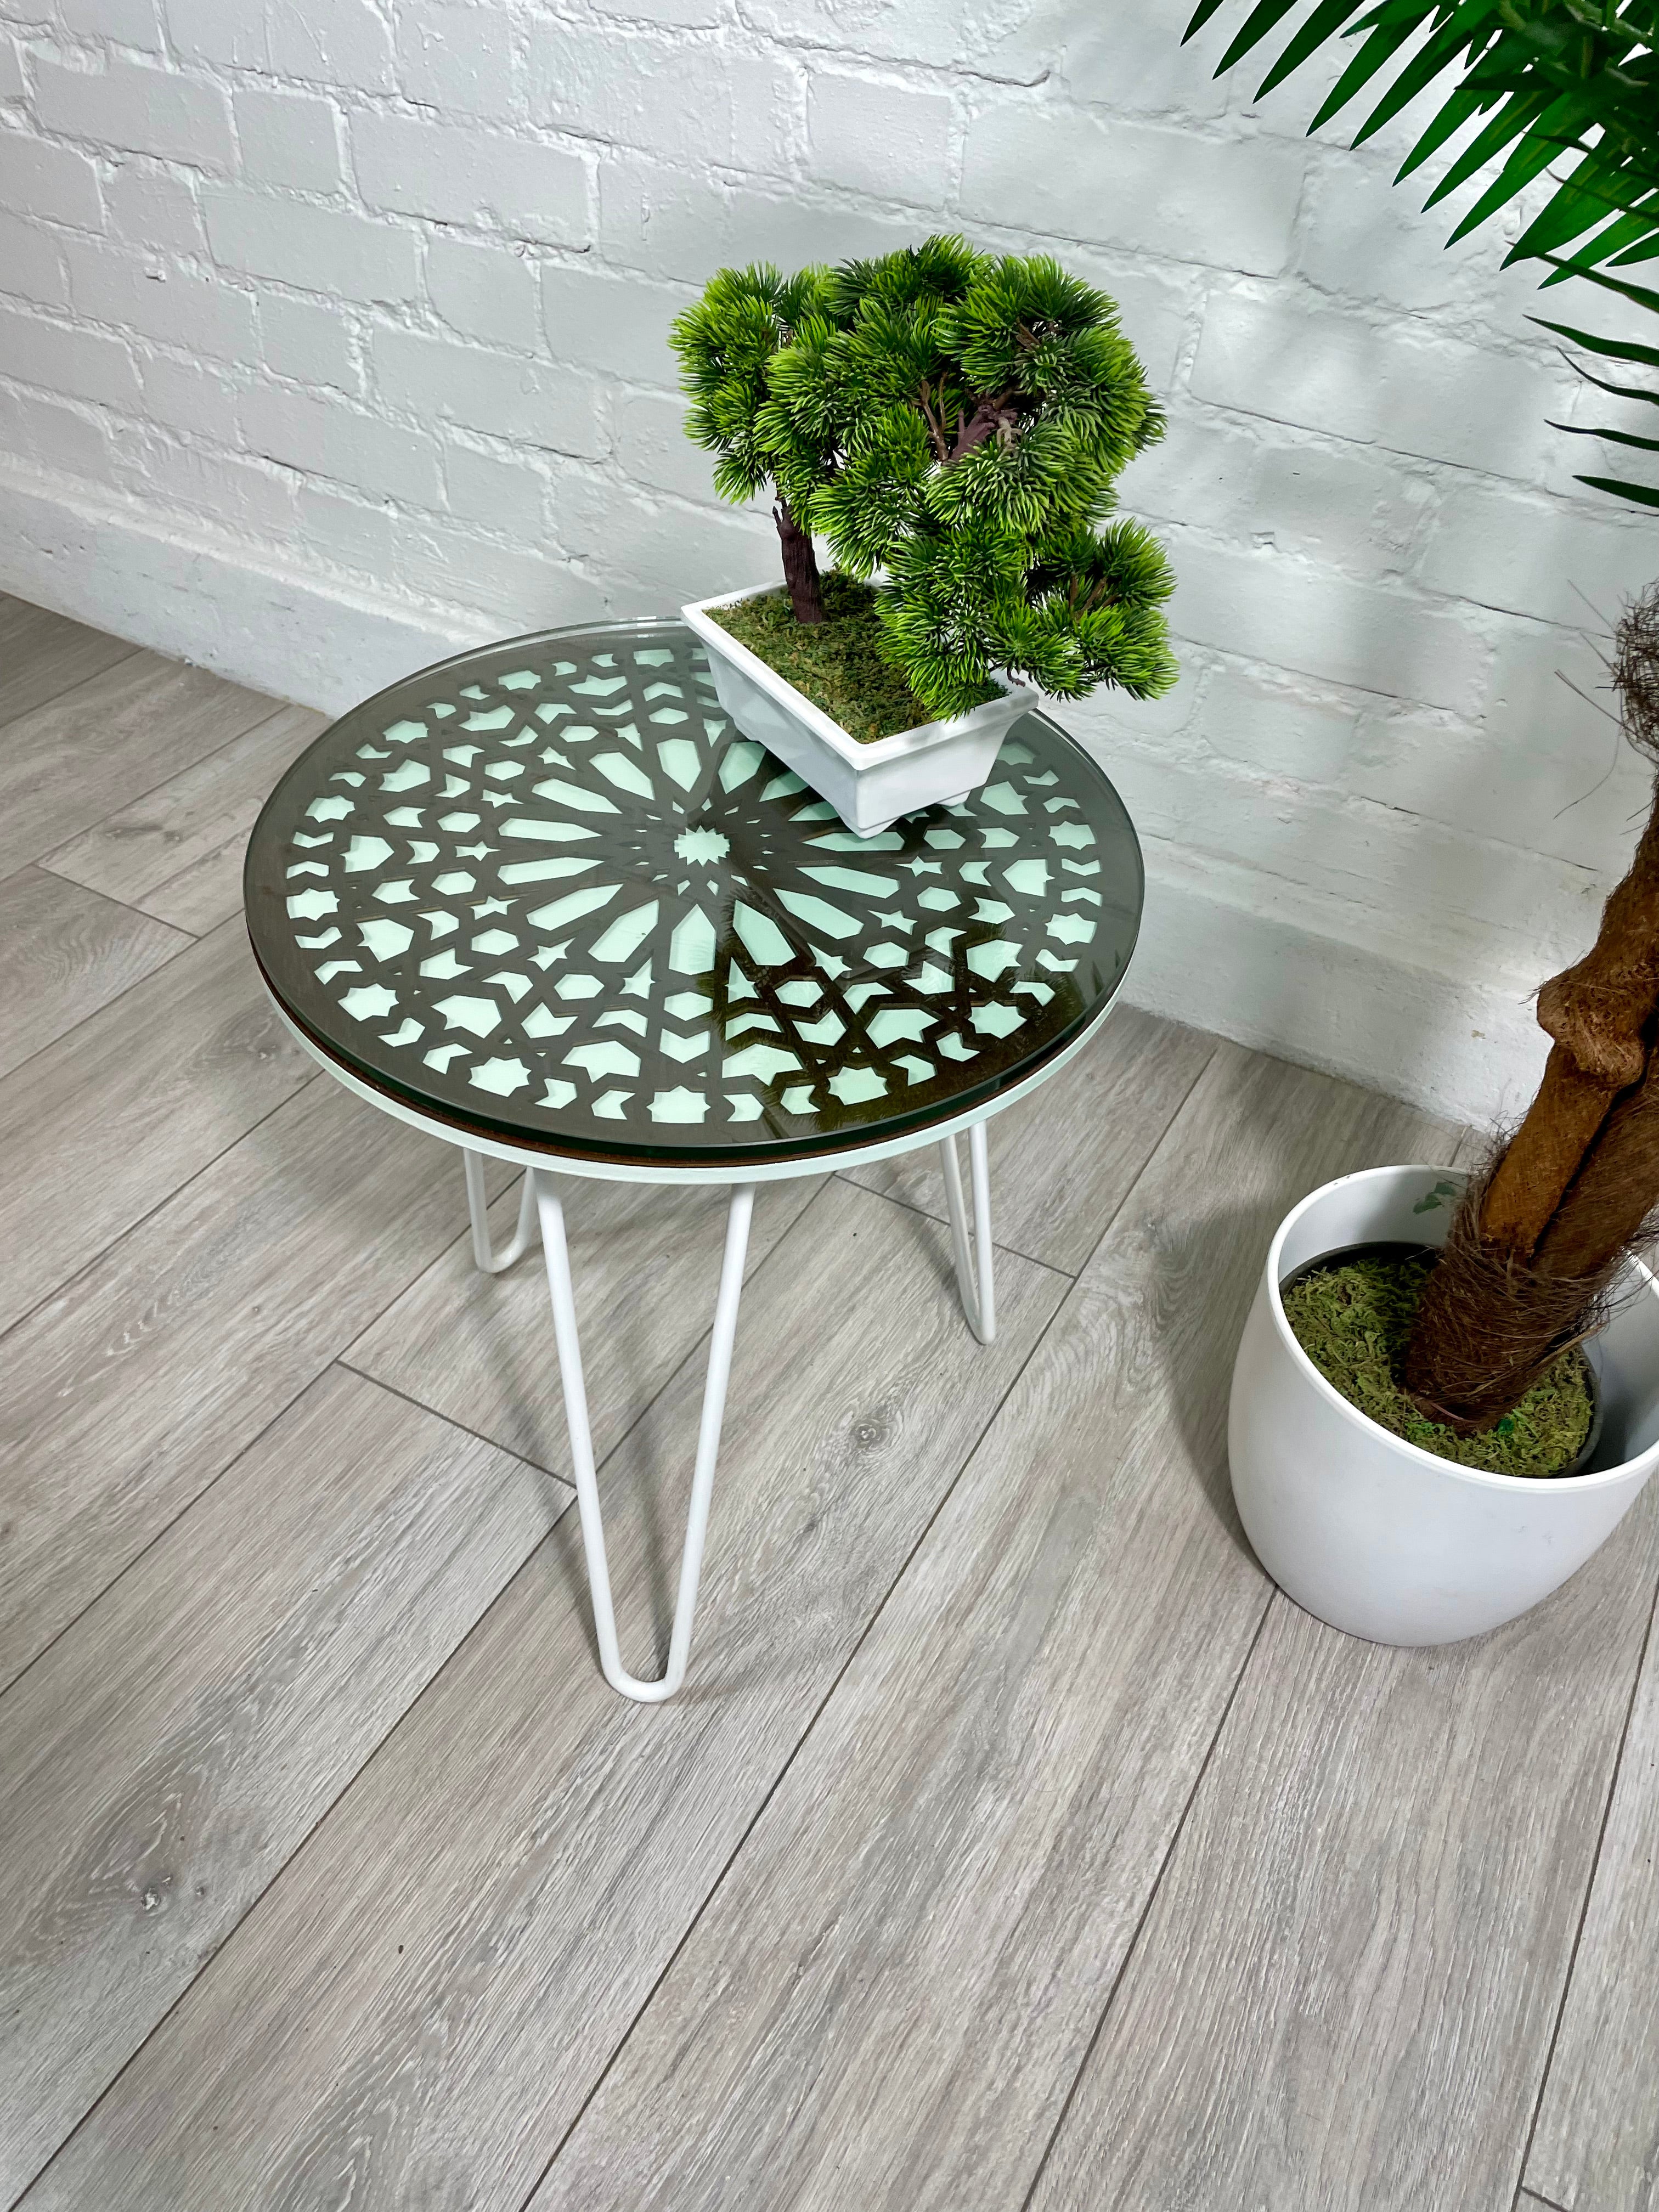 Moroccan Mosaic Side Table Pin Legs, Zellige Table Green Pastel and Walnut stain with  Glass Top